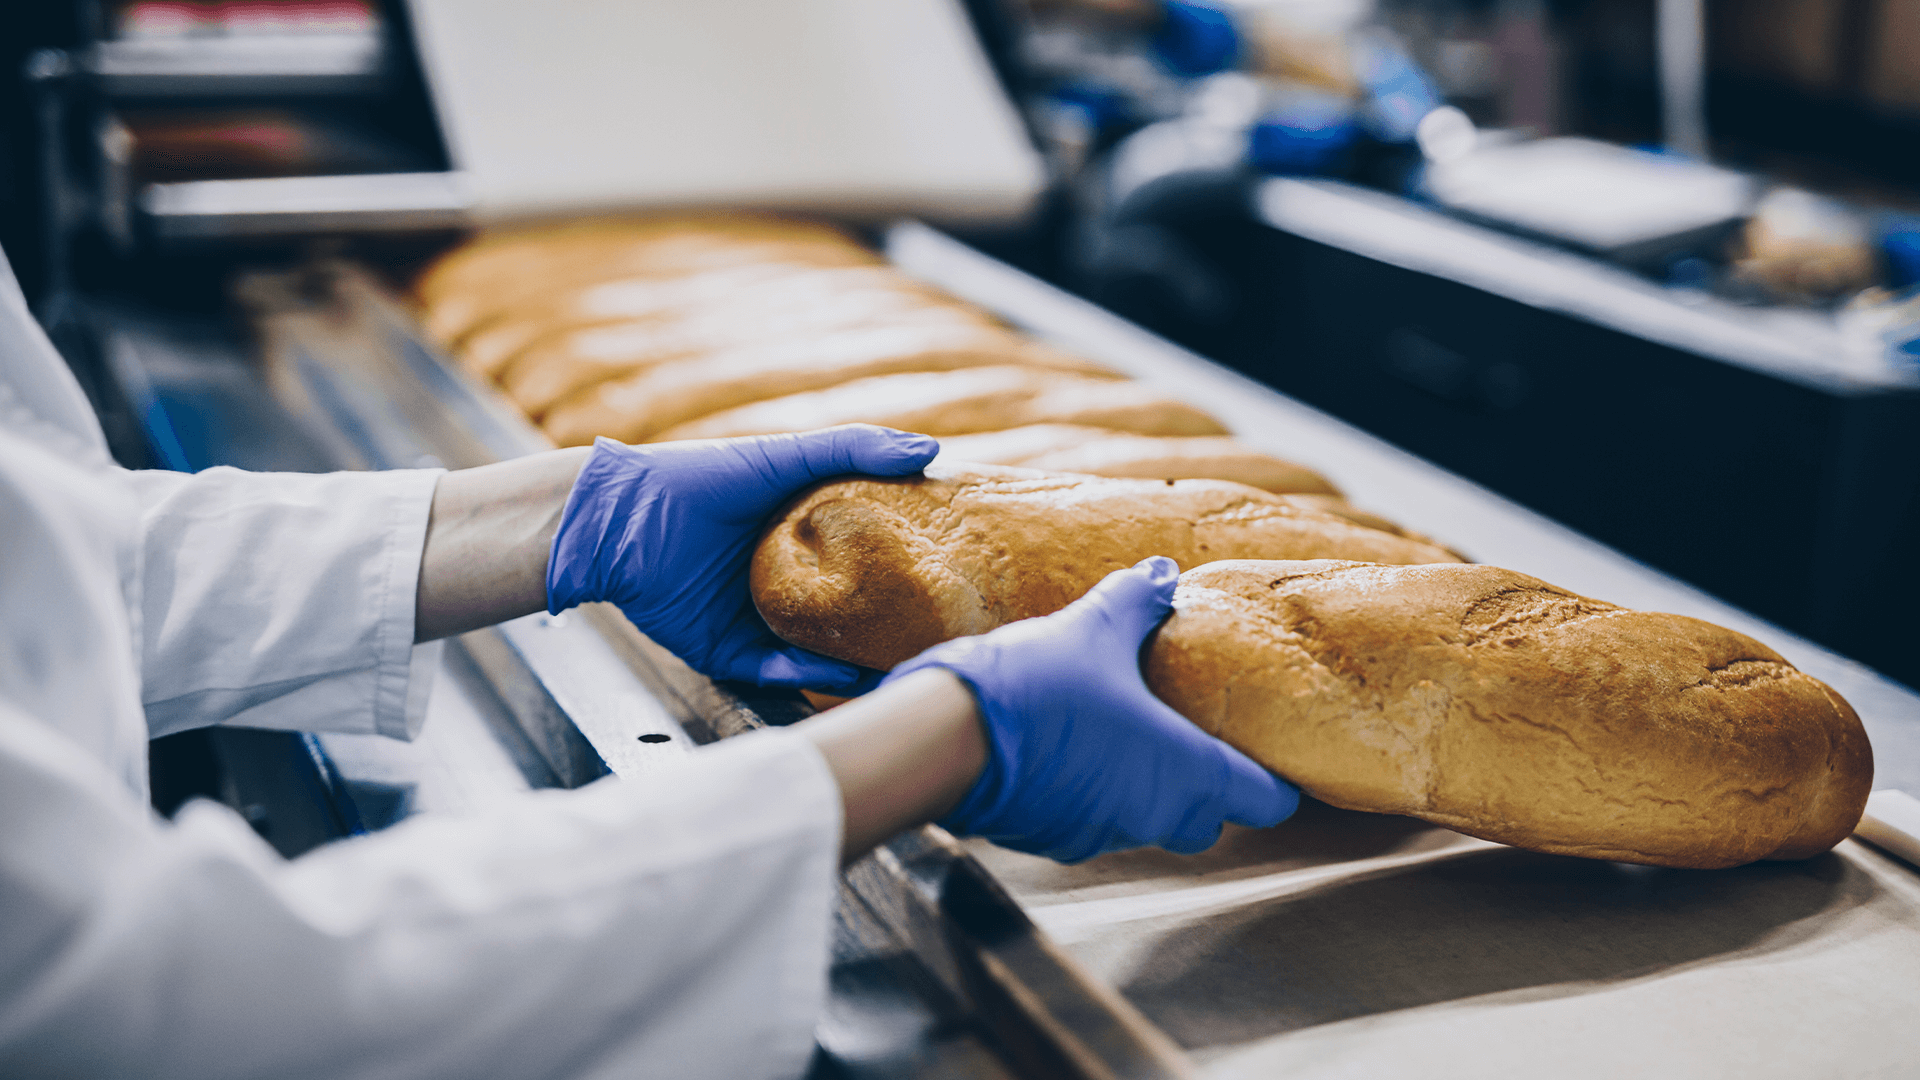 Dawsongroup PCC | Bakery - Solution for Spike in Baked Goods Demand